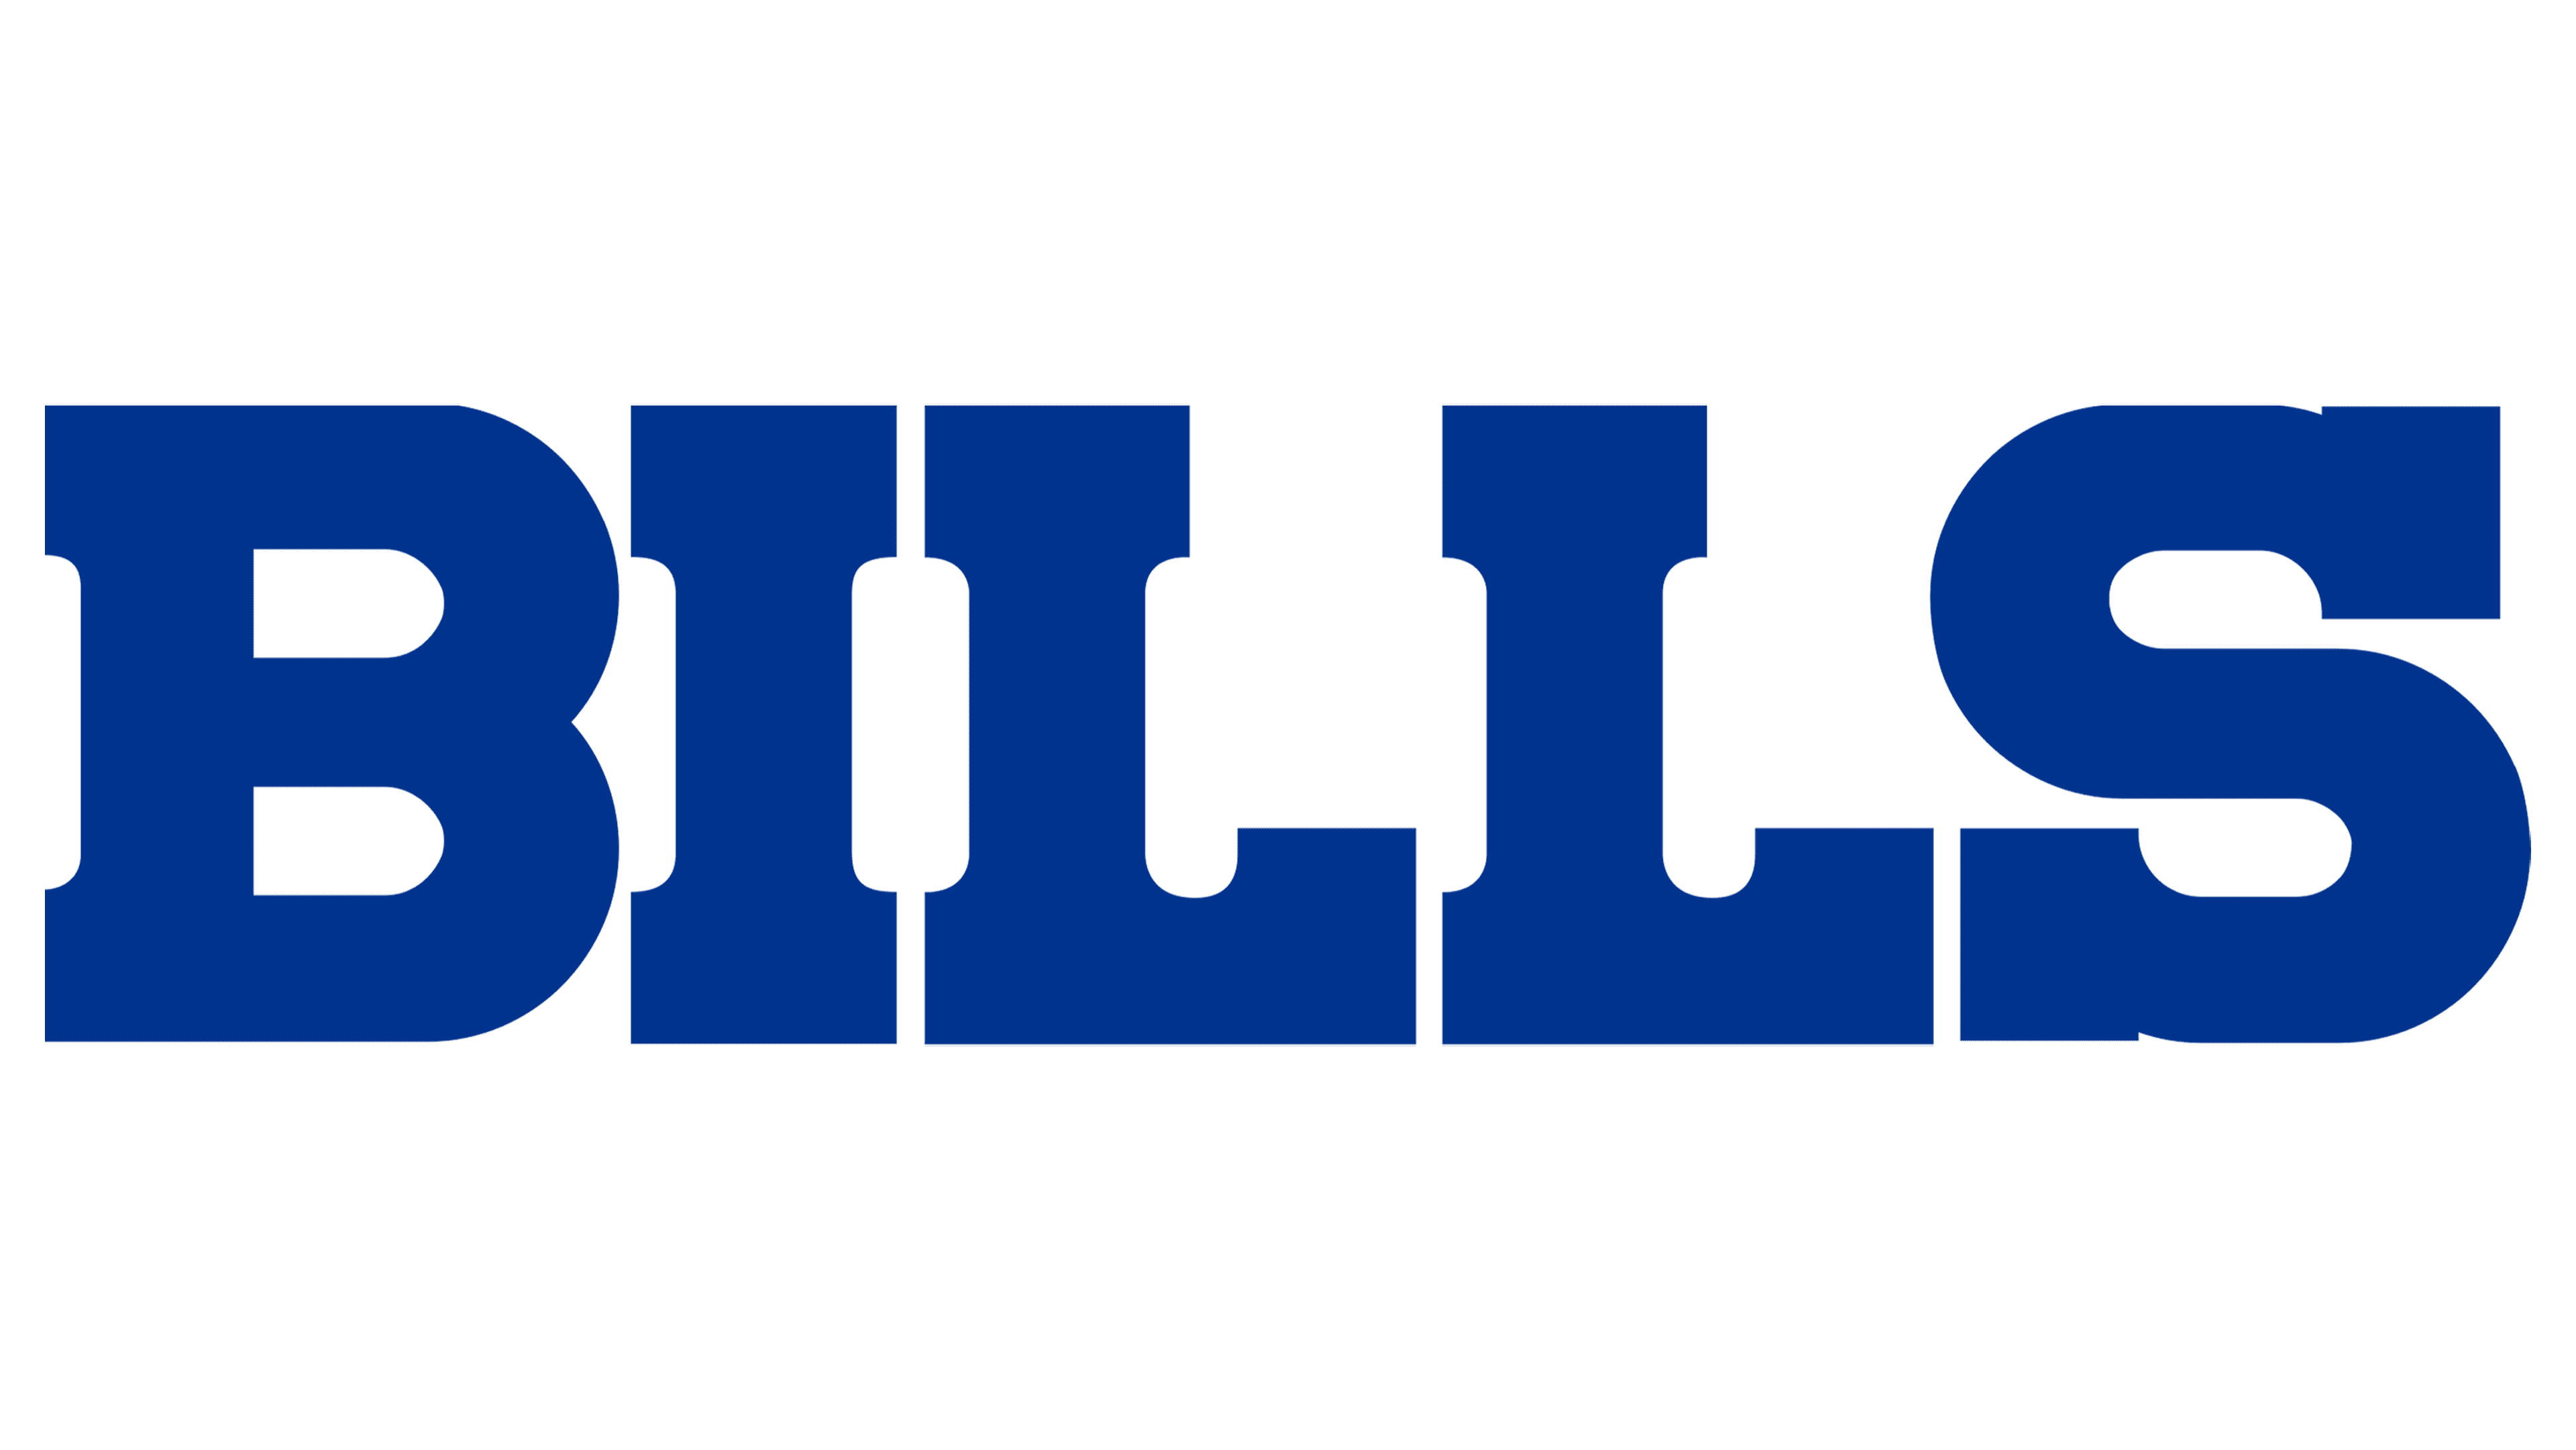 Buffalo Bills Logo and sign, new logo meaning and history, PNG, SVG